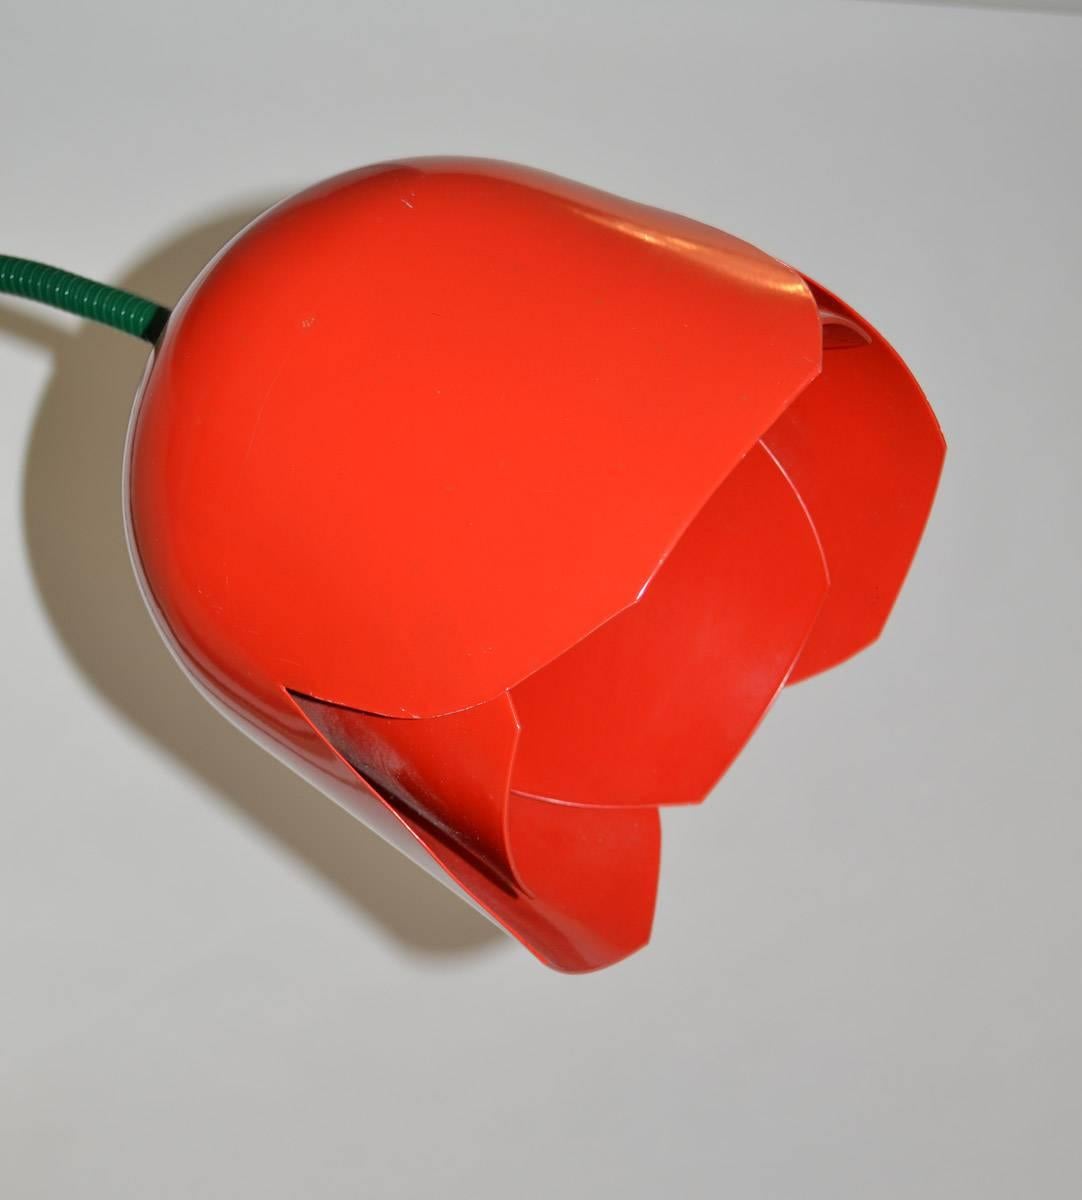 Tulip floor lamp Pop Art in painted metal by Bliss, UK 1980s. Designed and manufactured by Bliss, UK. Adjustable stem. Green enameled metal base and stem, red enameled flower. Tulip design with adjustable gooseneck stem. Produces beautiful light.